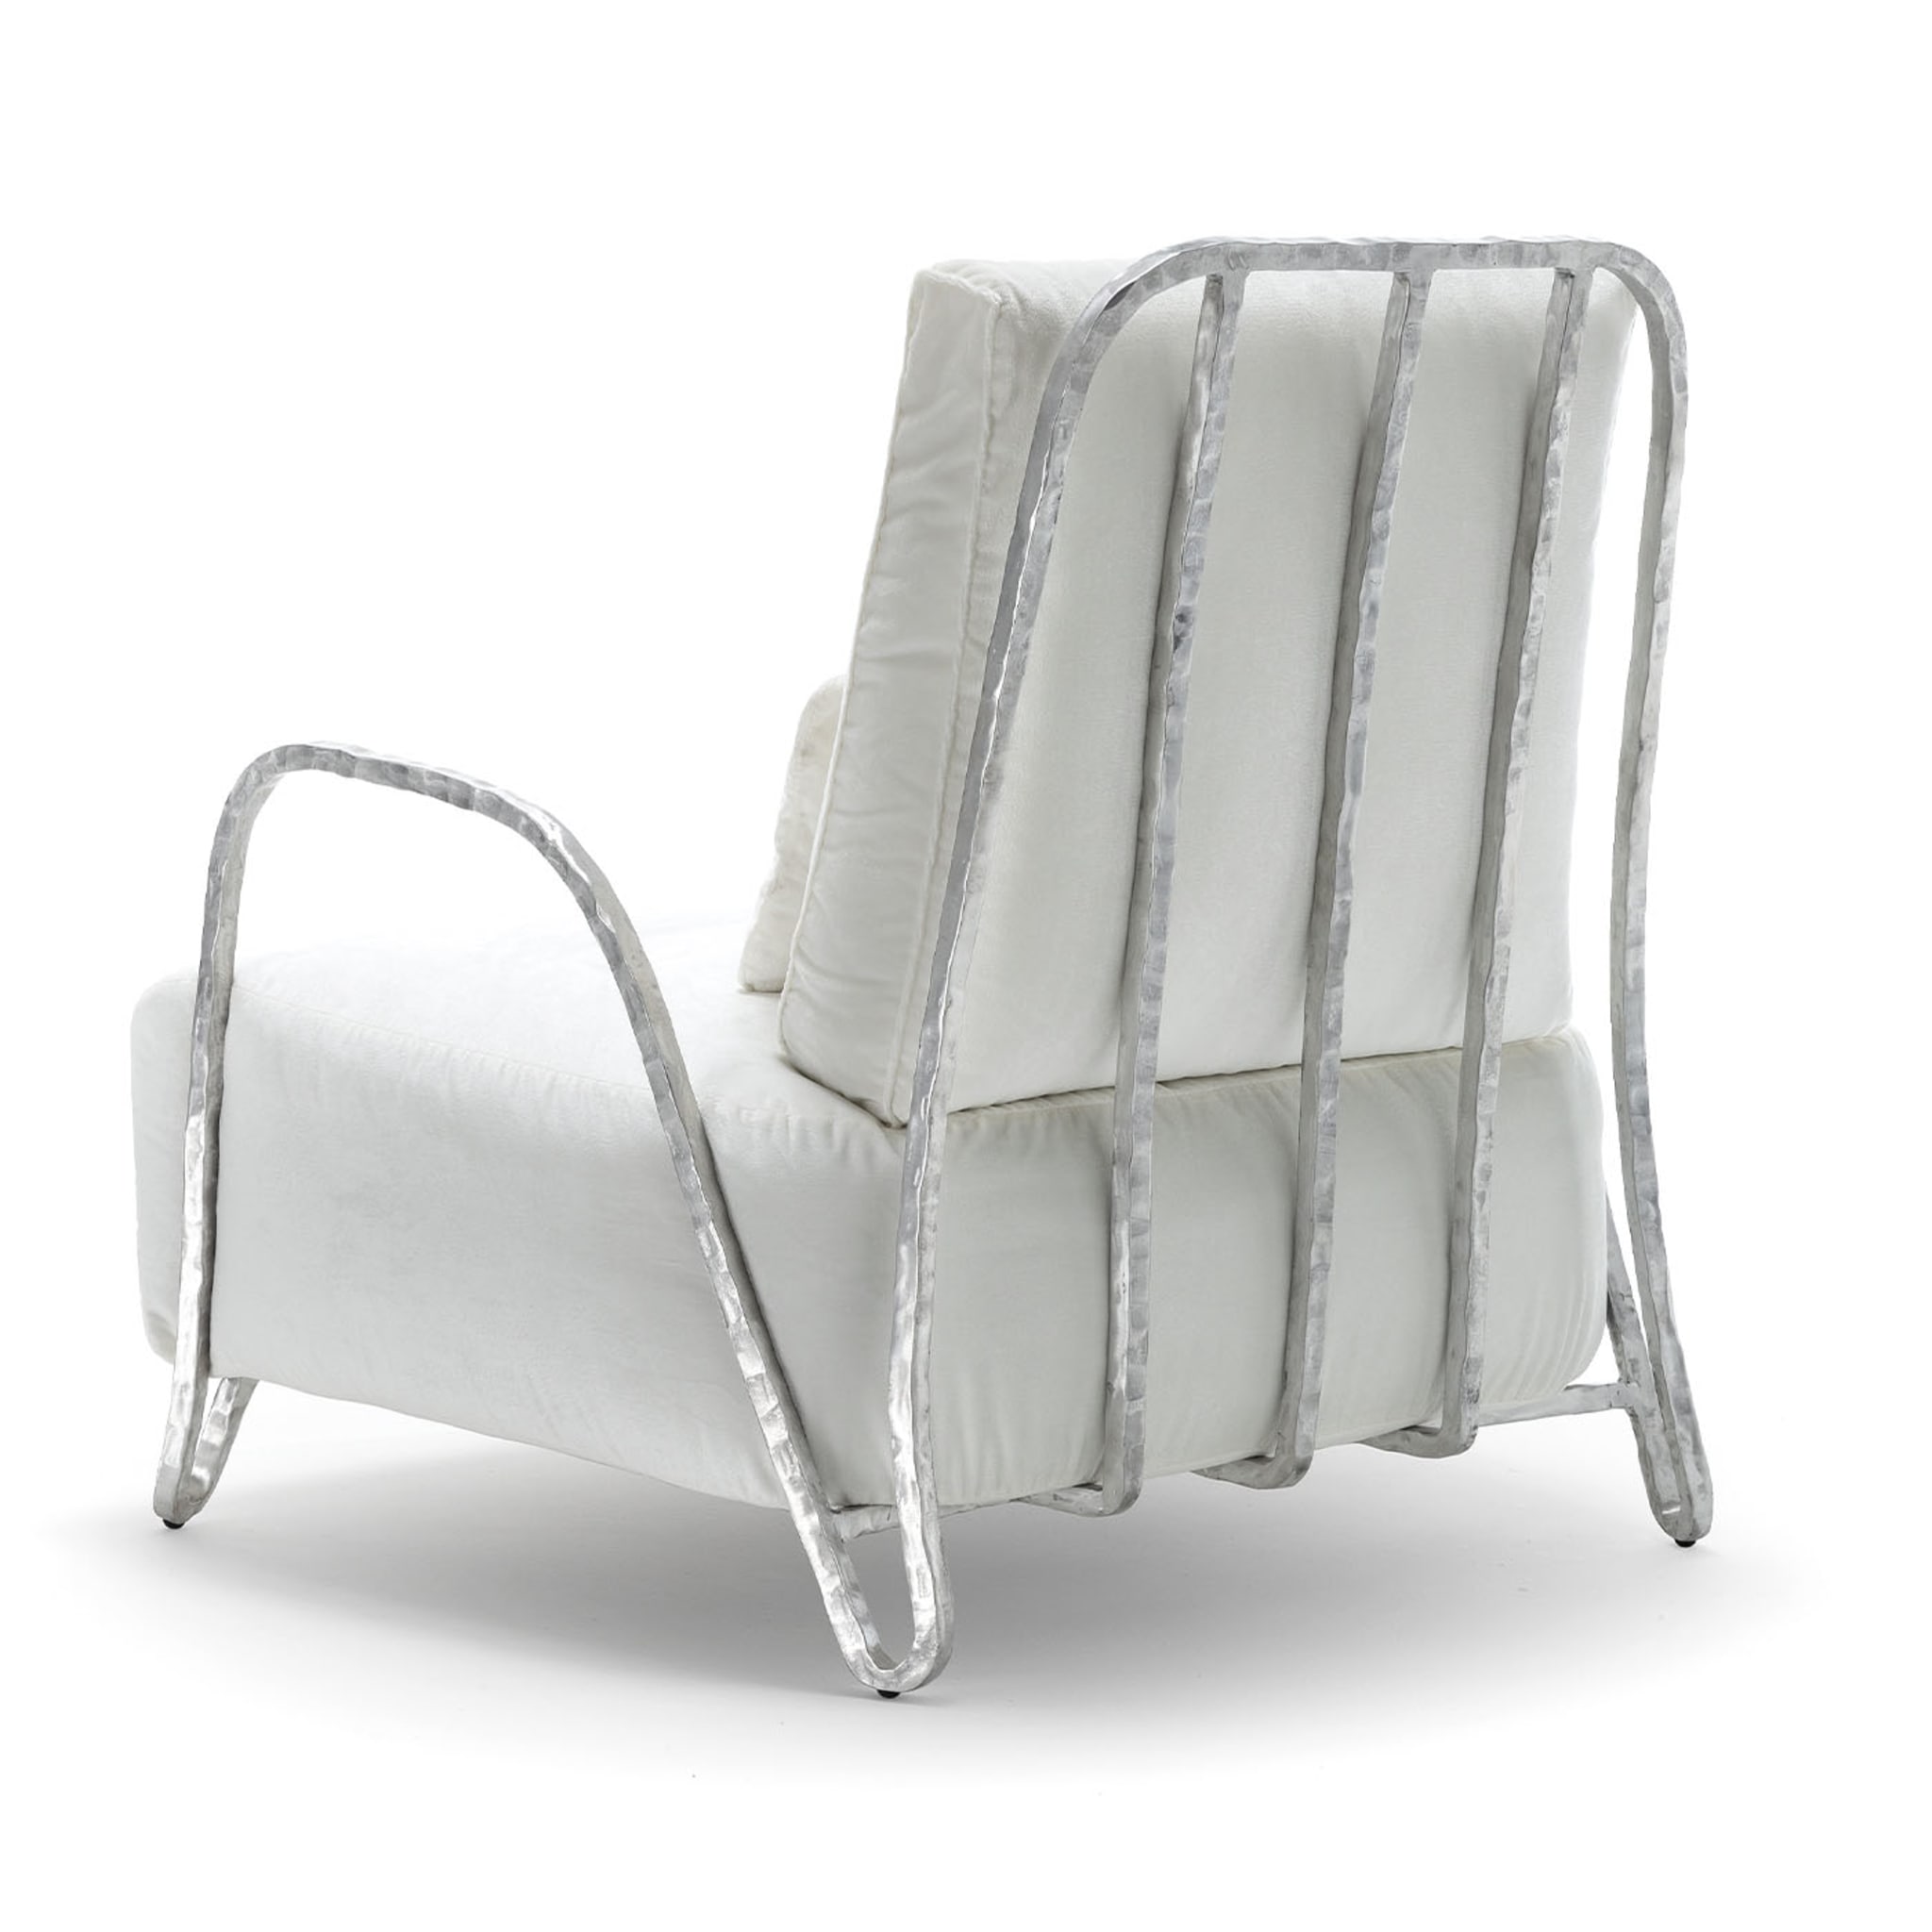 Moonlight White and Silver High Armchair - Alternative view 3